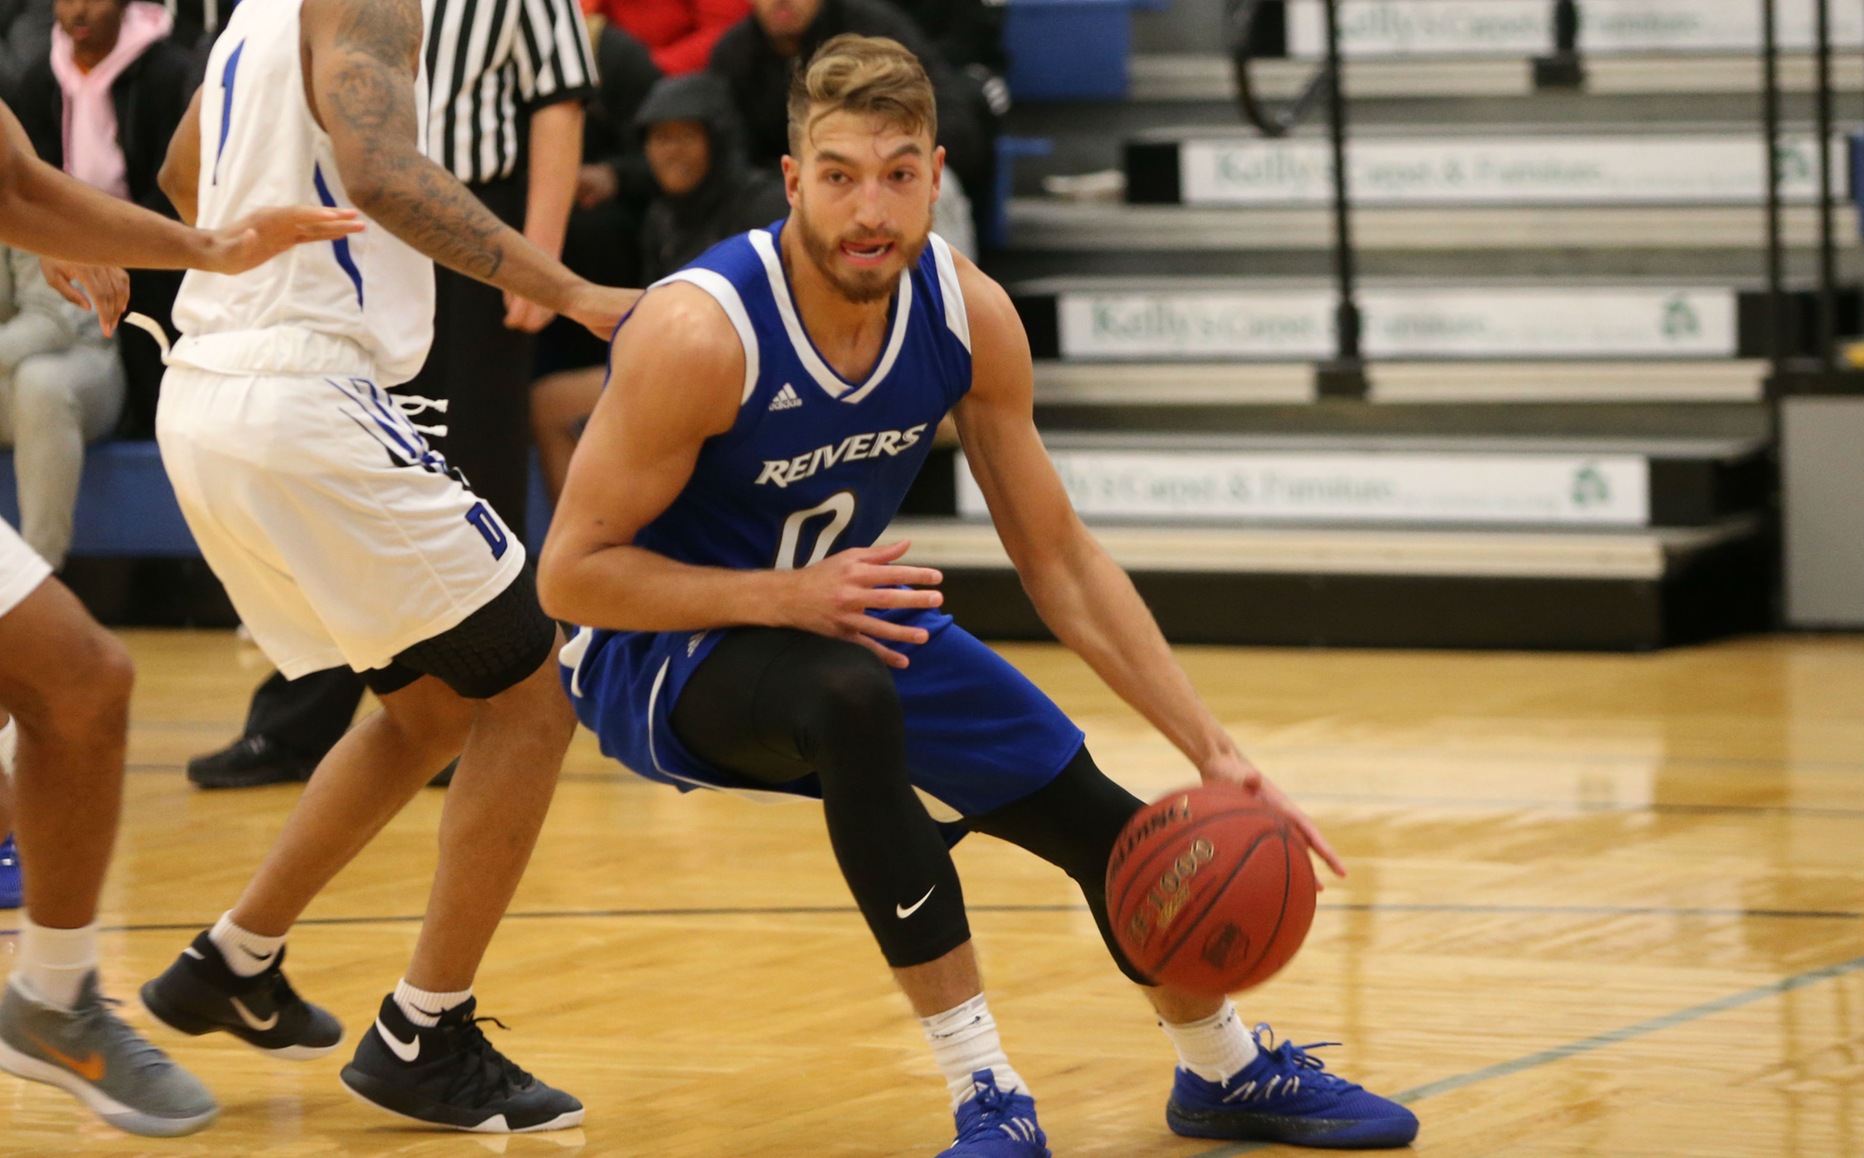 Parker Hazen and his Iowa Western teammates captured a road conference win at Marshalltown Wednesday evening (1/23/19) with a 77-70 victory over the home-standing Tigers.